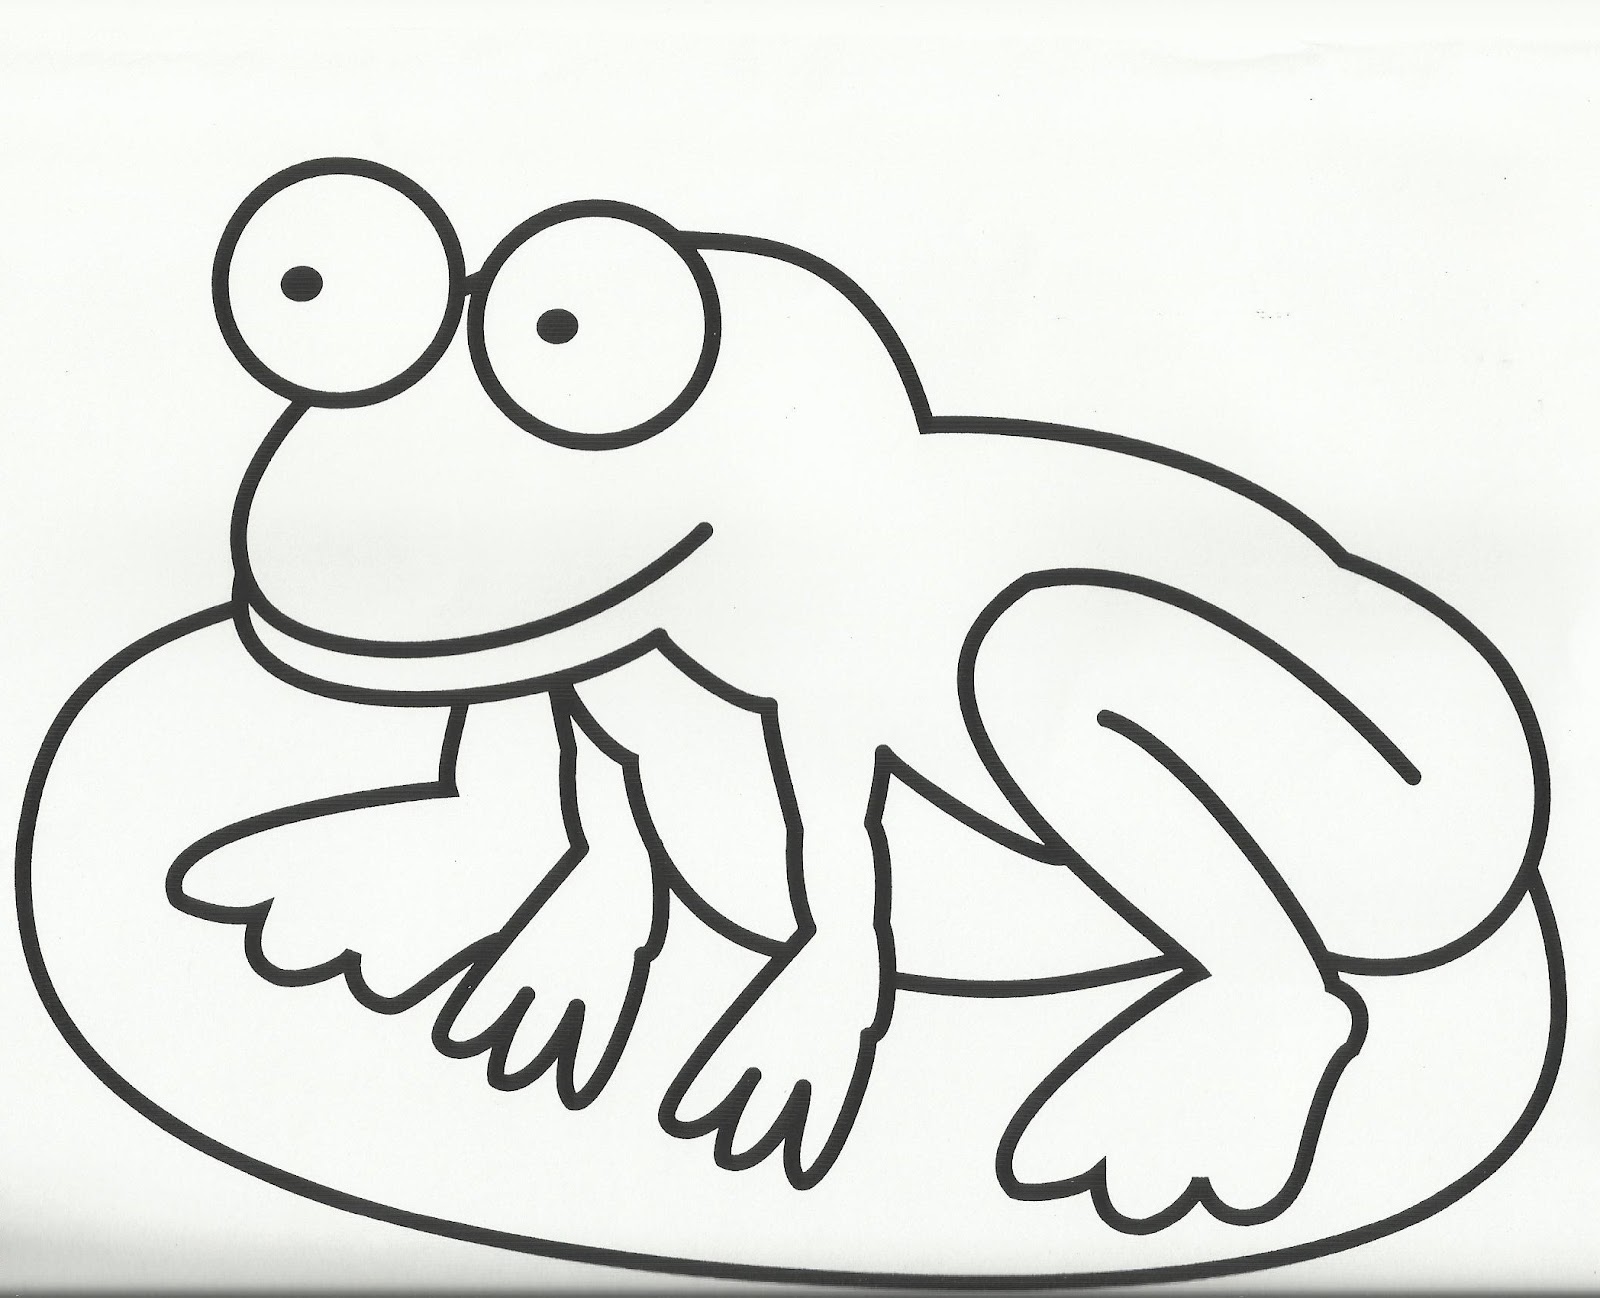 55-free-printable-frog-coloring-pages-in-vector-format-easy-to-print